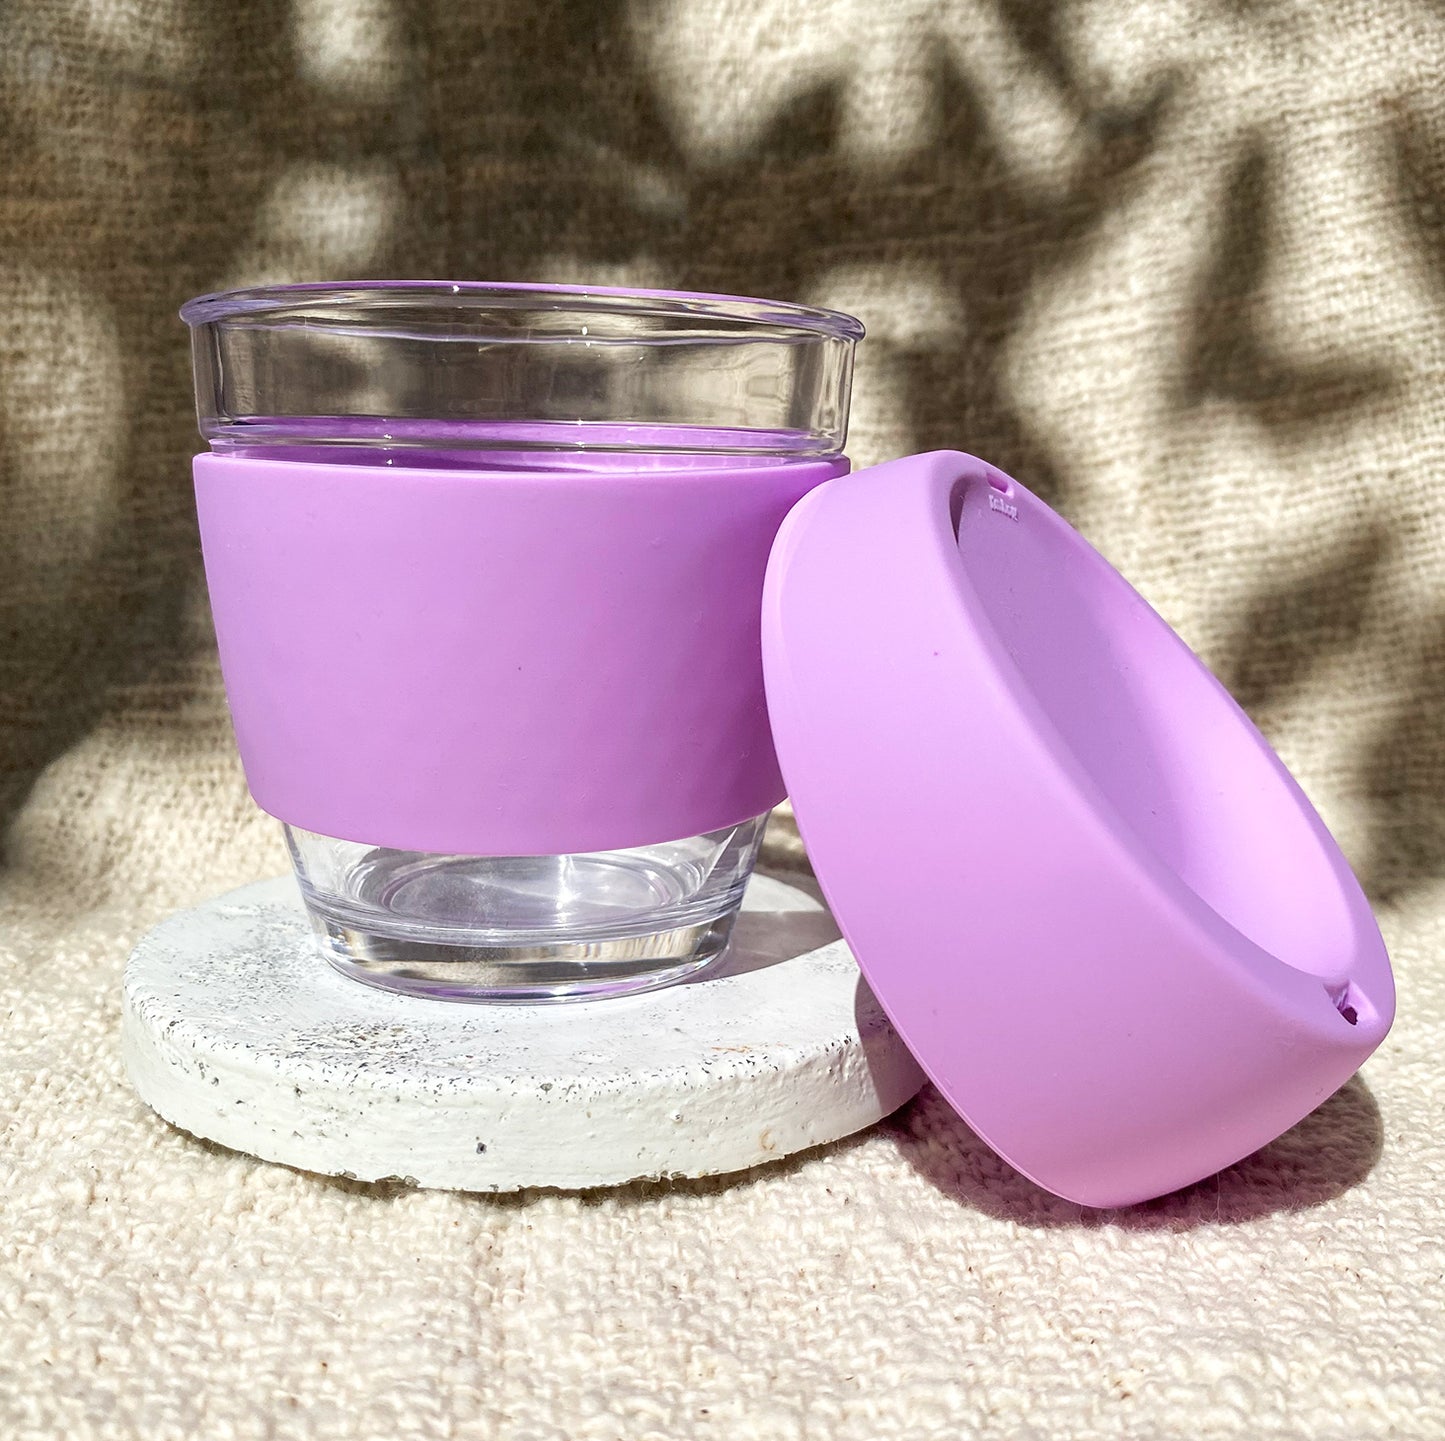 Reusable small purple glass with monogrammed name and coffee order